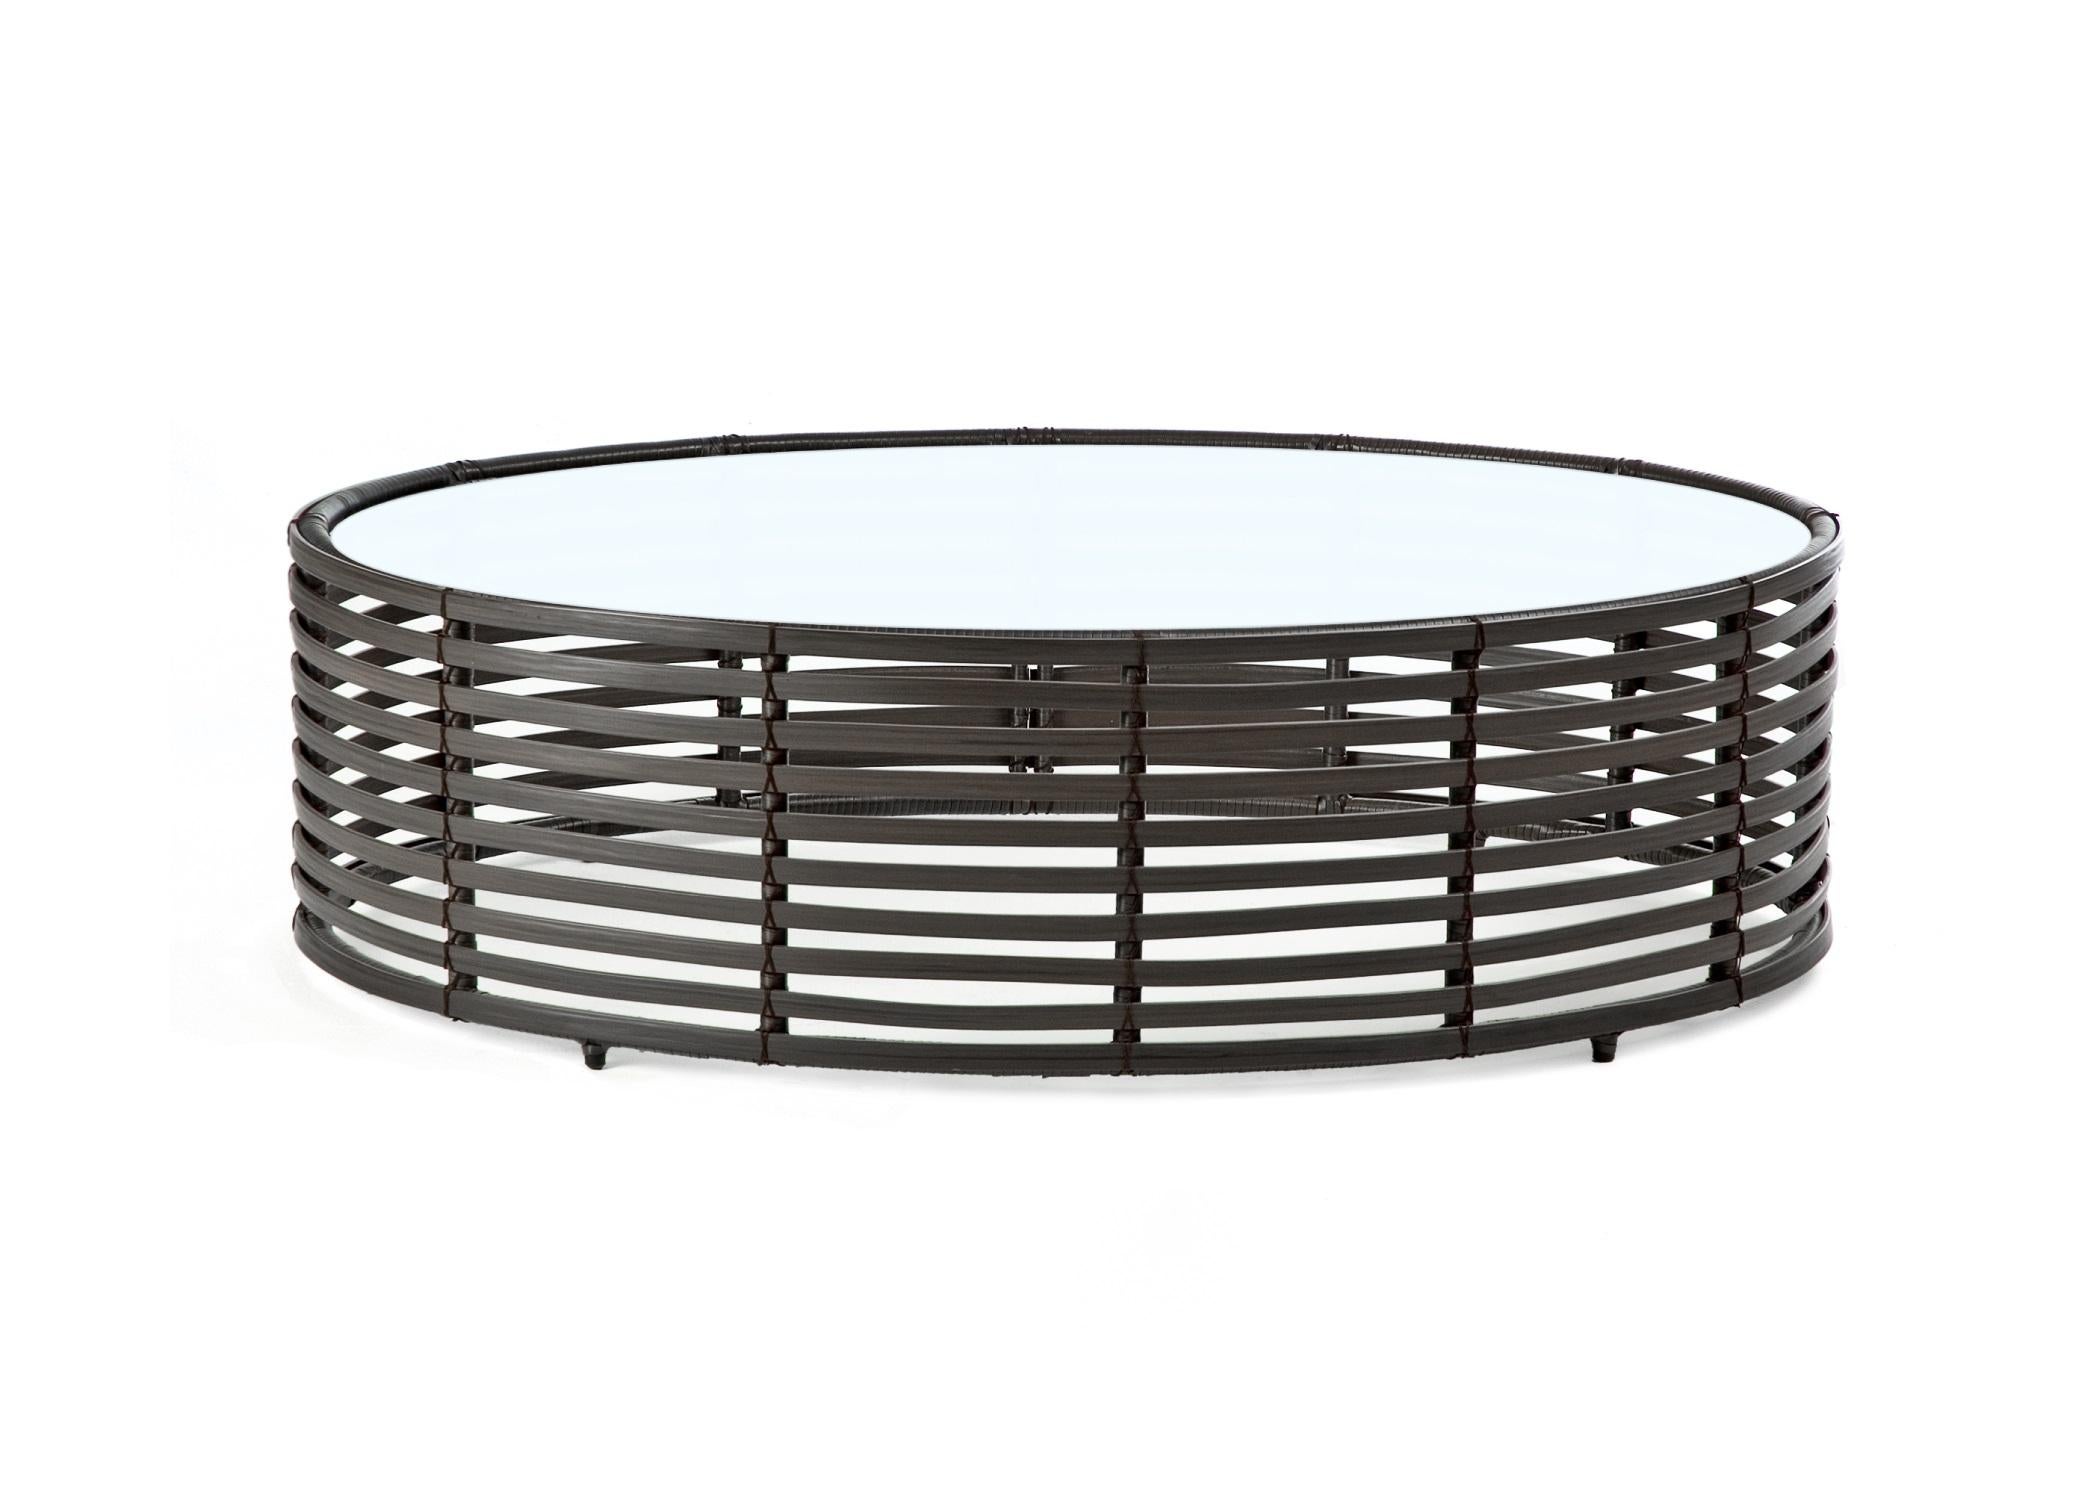 Outdoor large oval Lolah coffee table by Kenneth Cobonpue..
Materials: Polyethelene, aluminum. Glass.
Also available in other colors and for indoors. 
Dimensions: 
Glass 78cm x 118cm x H 10mm
Table 80cm x 120 cm x H 35 cm.


Created using